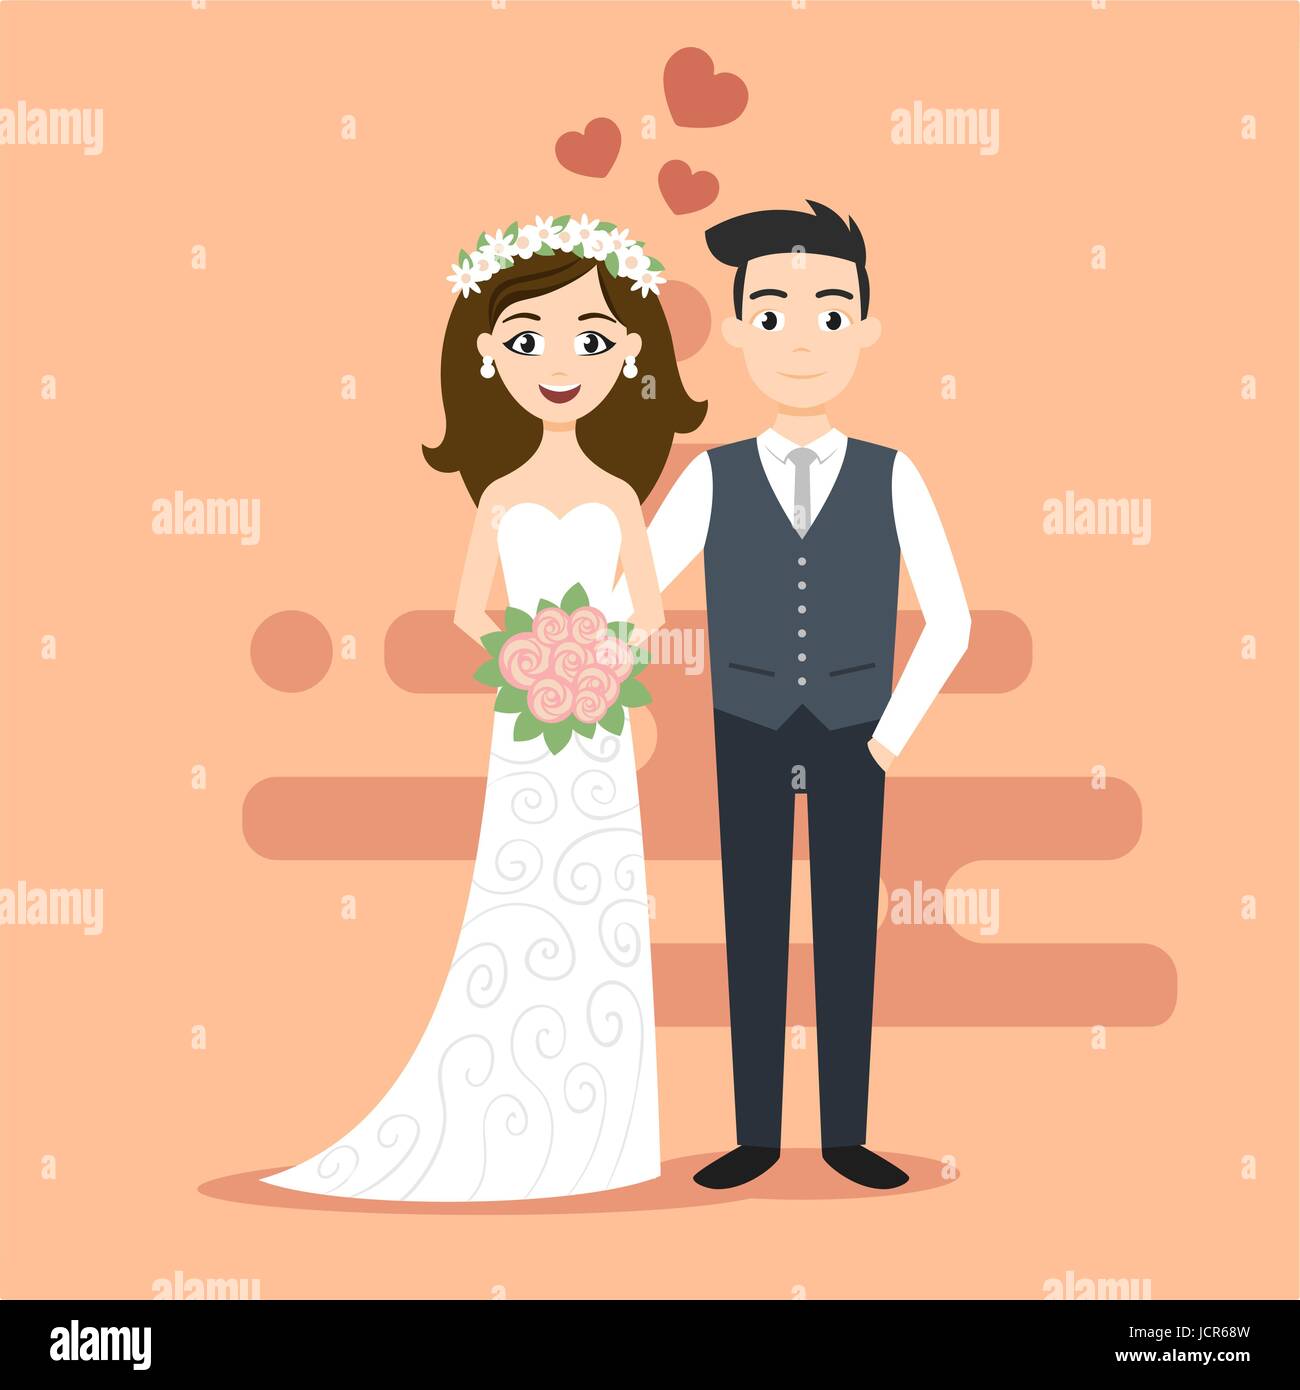 Just married - Stock Vector , #SPONSORED, #married, #Stock, #Vector #AD